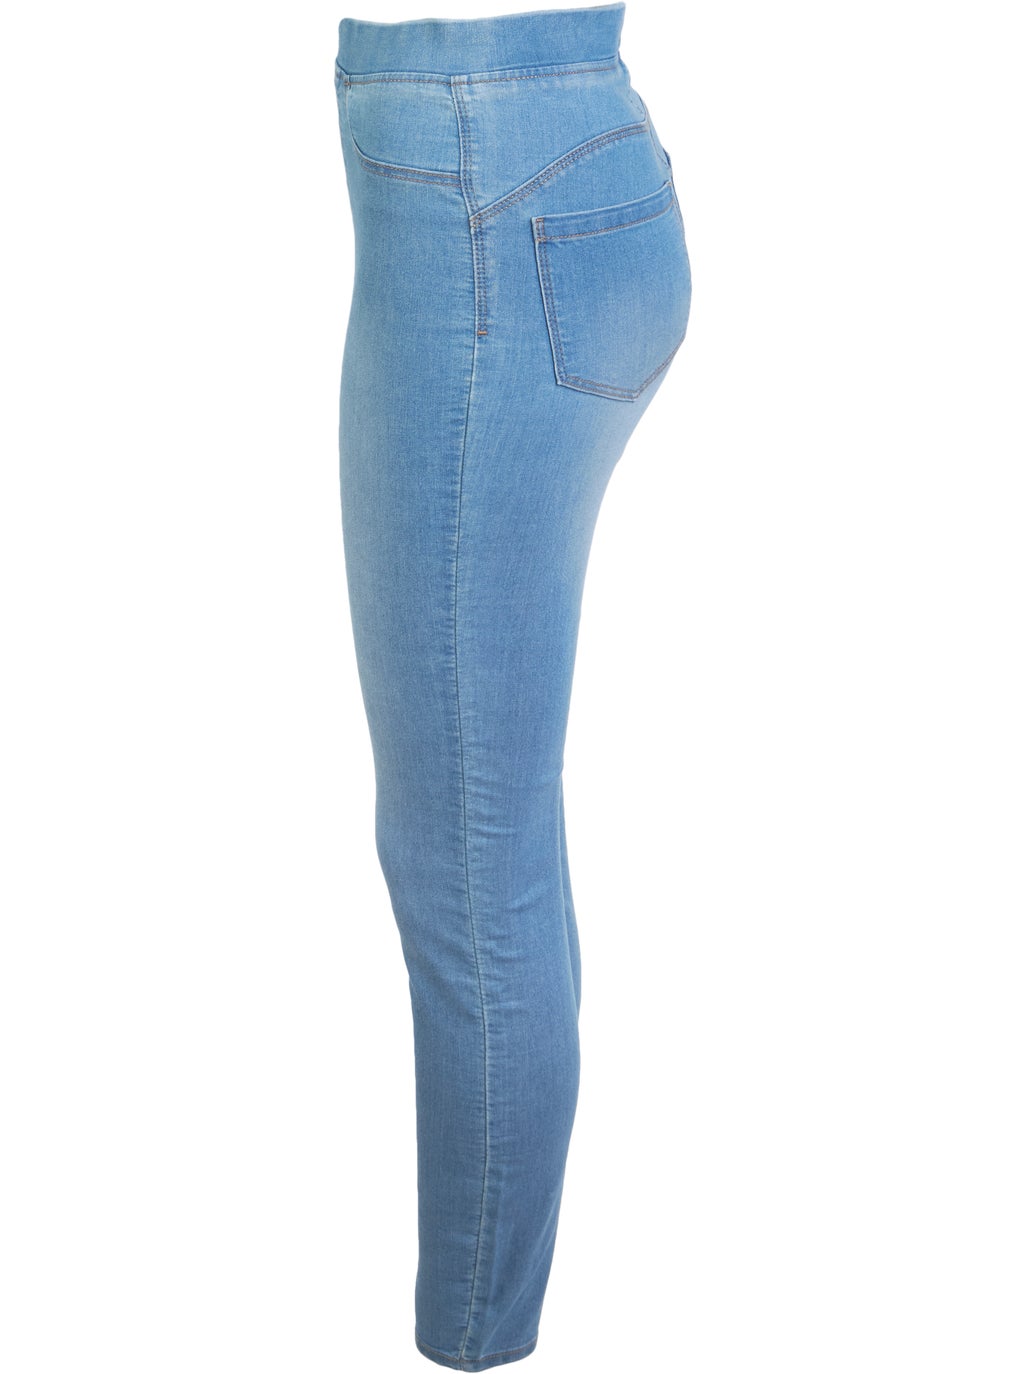 Women's High Rise Signature Jegging in Light Blue Wash